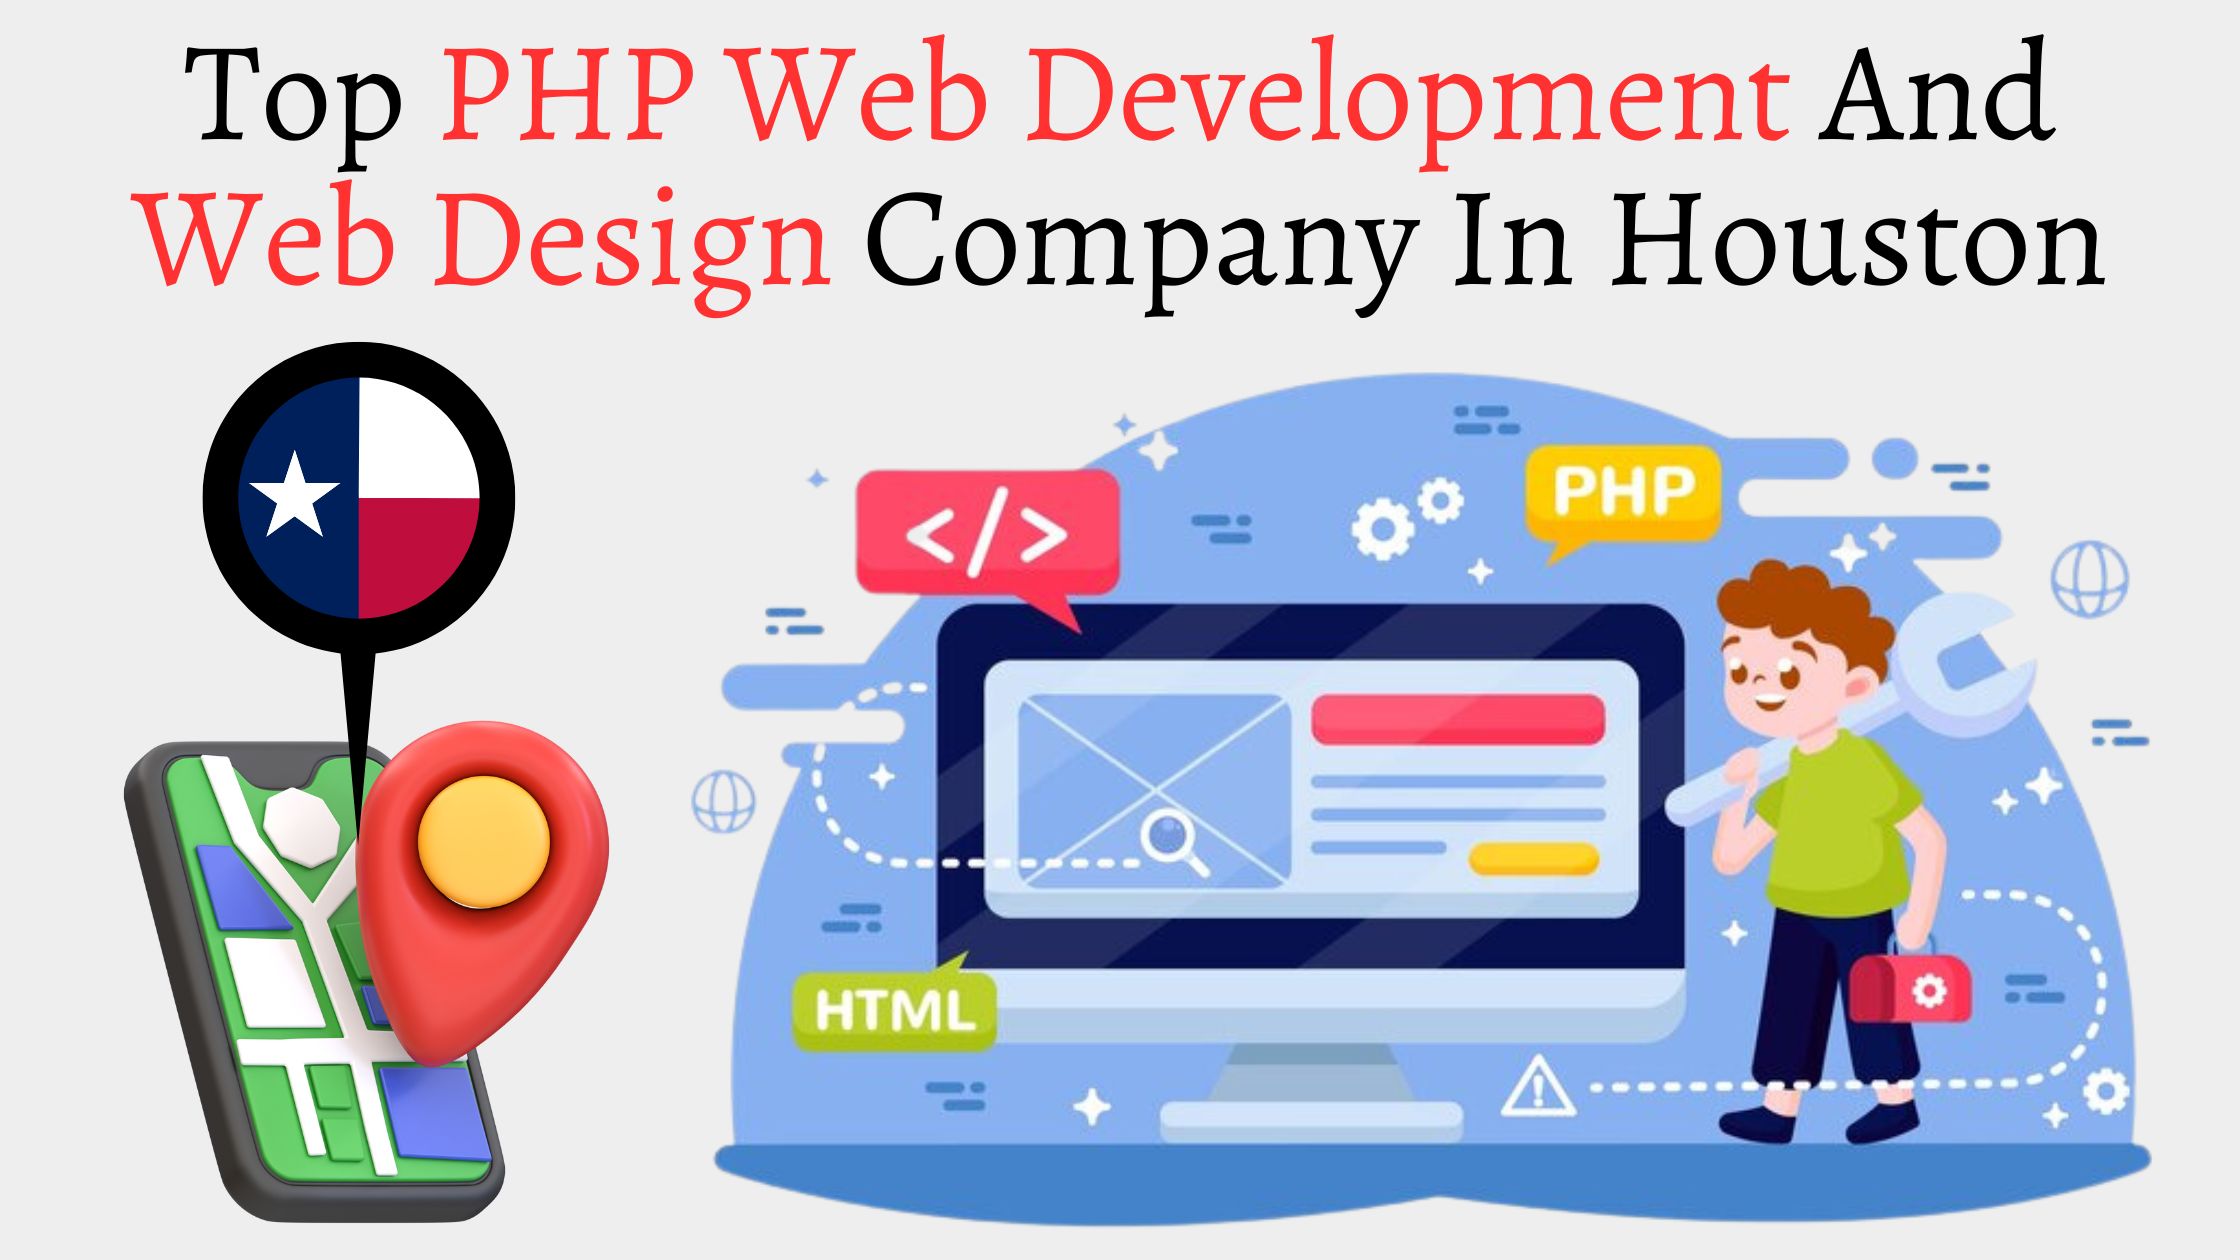 Top PHP Web Development And Web Design Company In Houston, TX